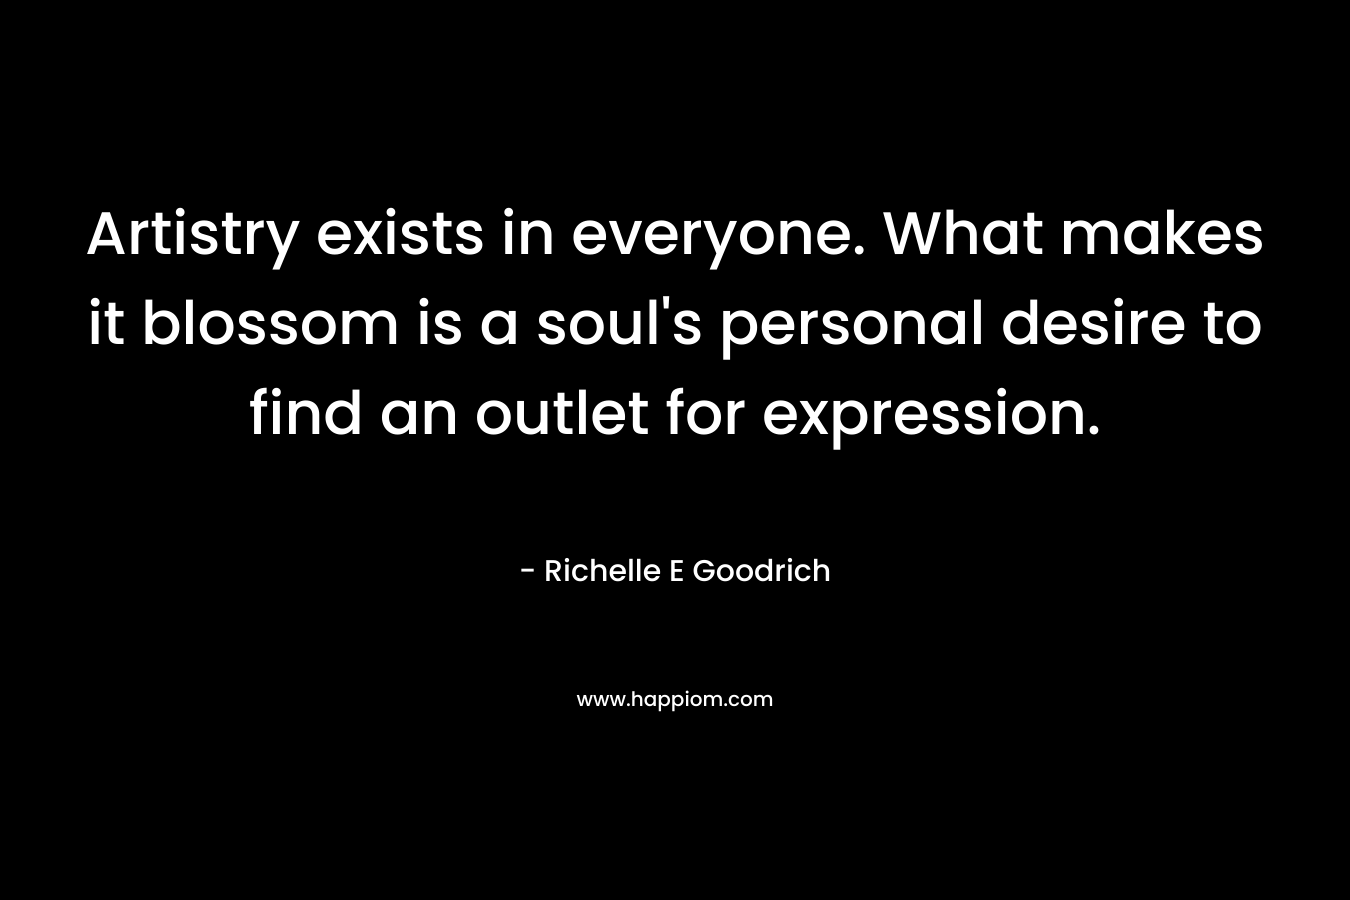 Artistry exists in everyone. What makes it blossom is a soul’s personal desire to find an outlet for expression. – Richelle E Goodrich